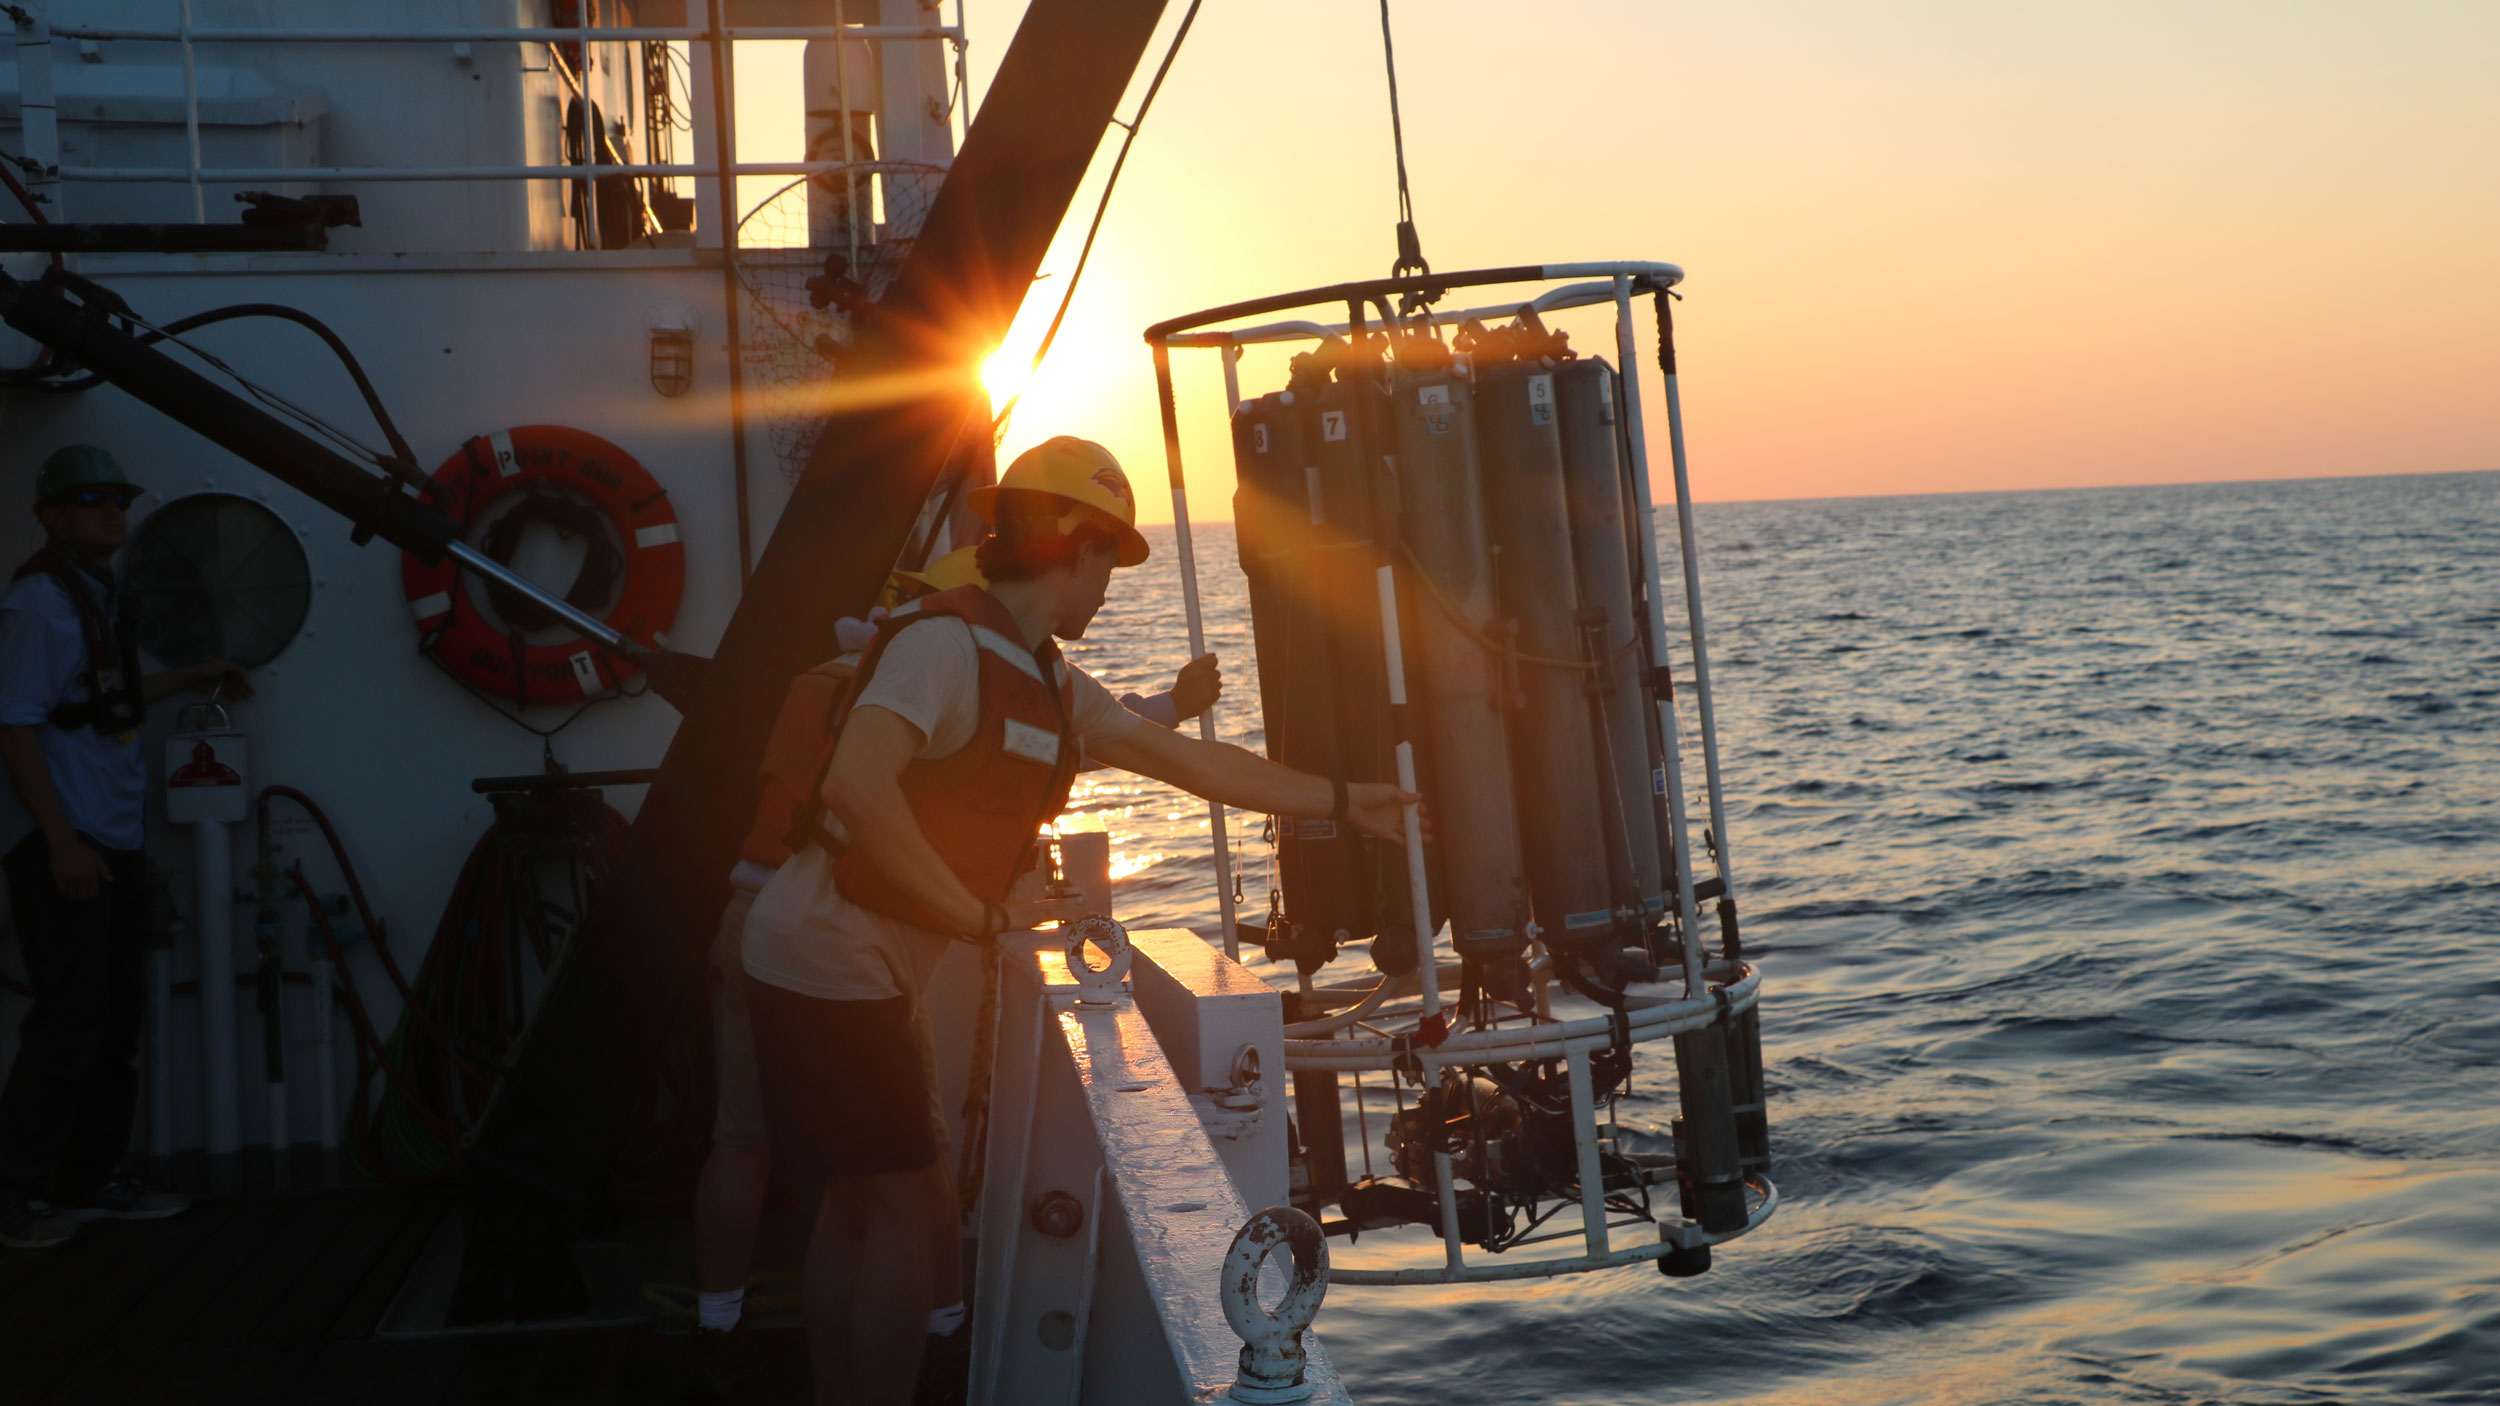 Two student researchers pulling up research equipment onto a boat from the ocean